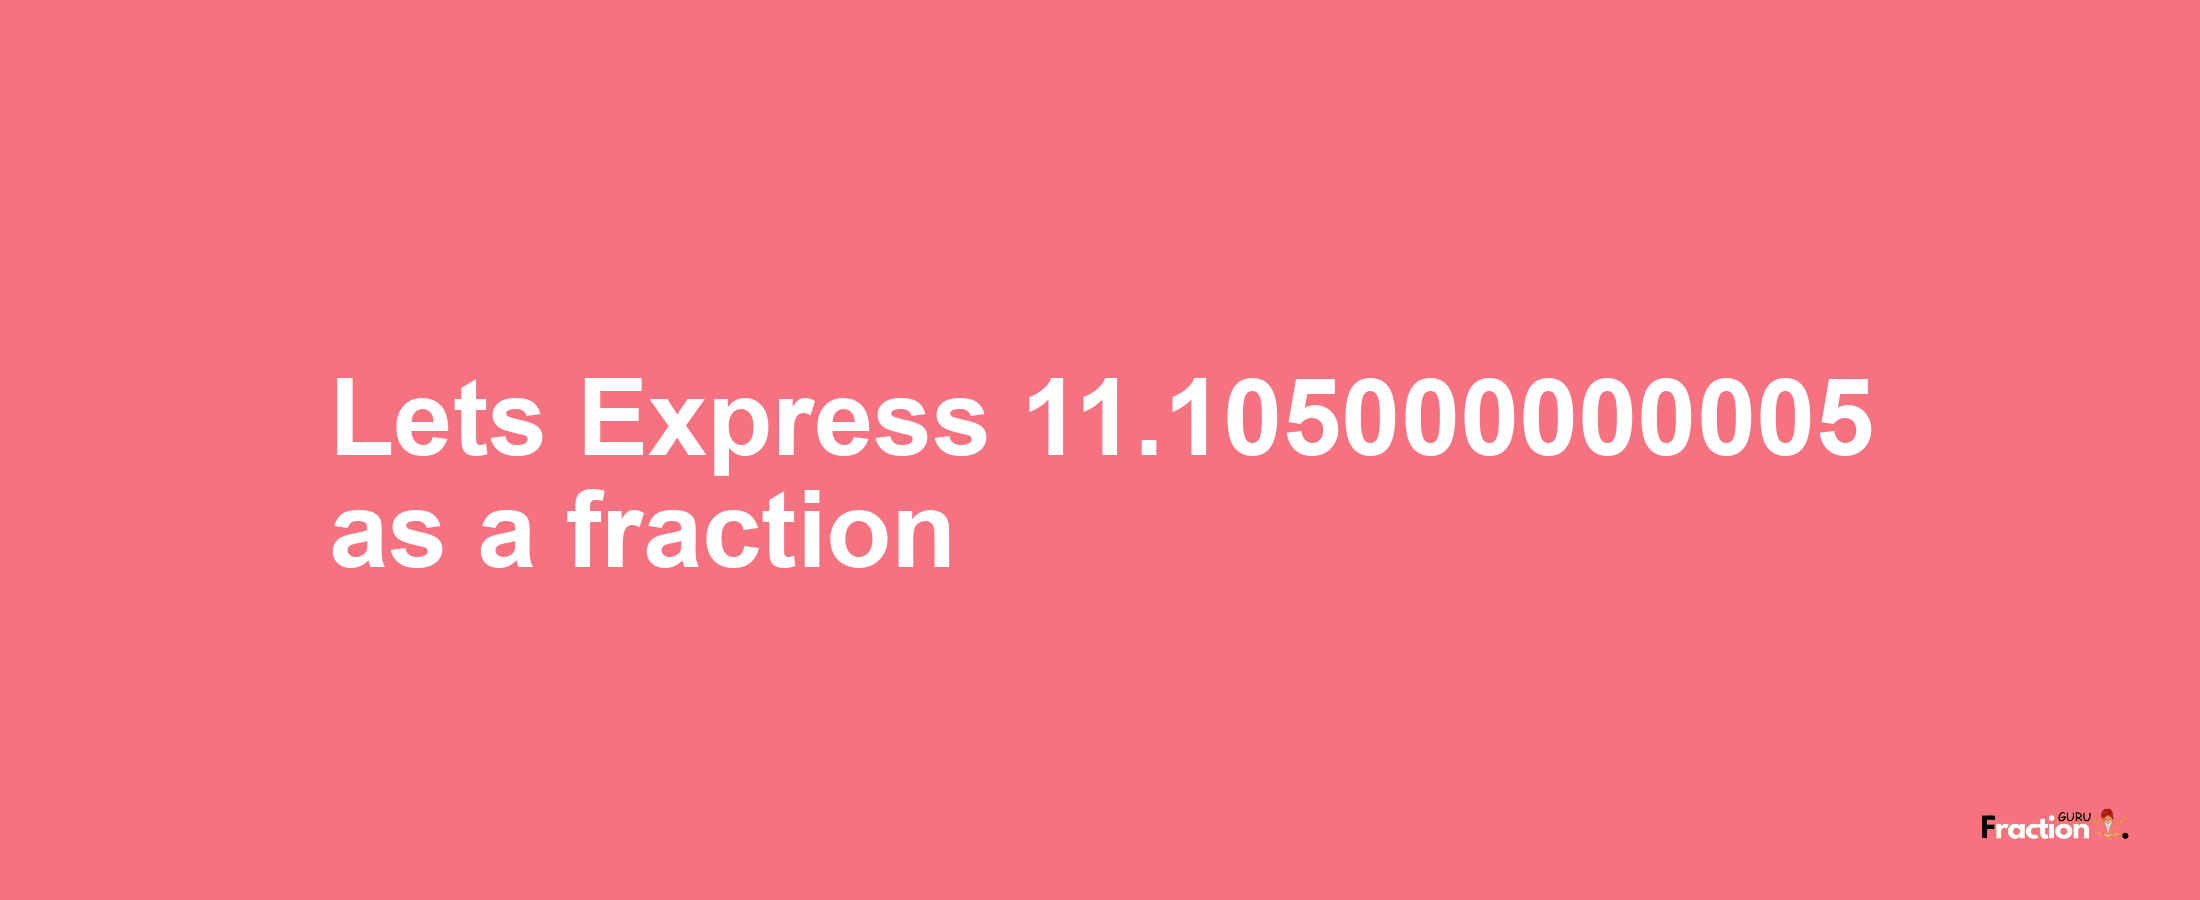 Lets Express 11.105000000005 as afraction